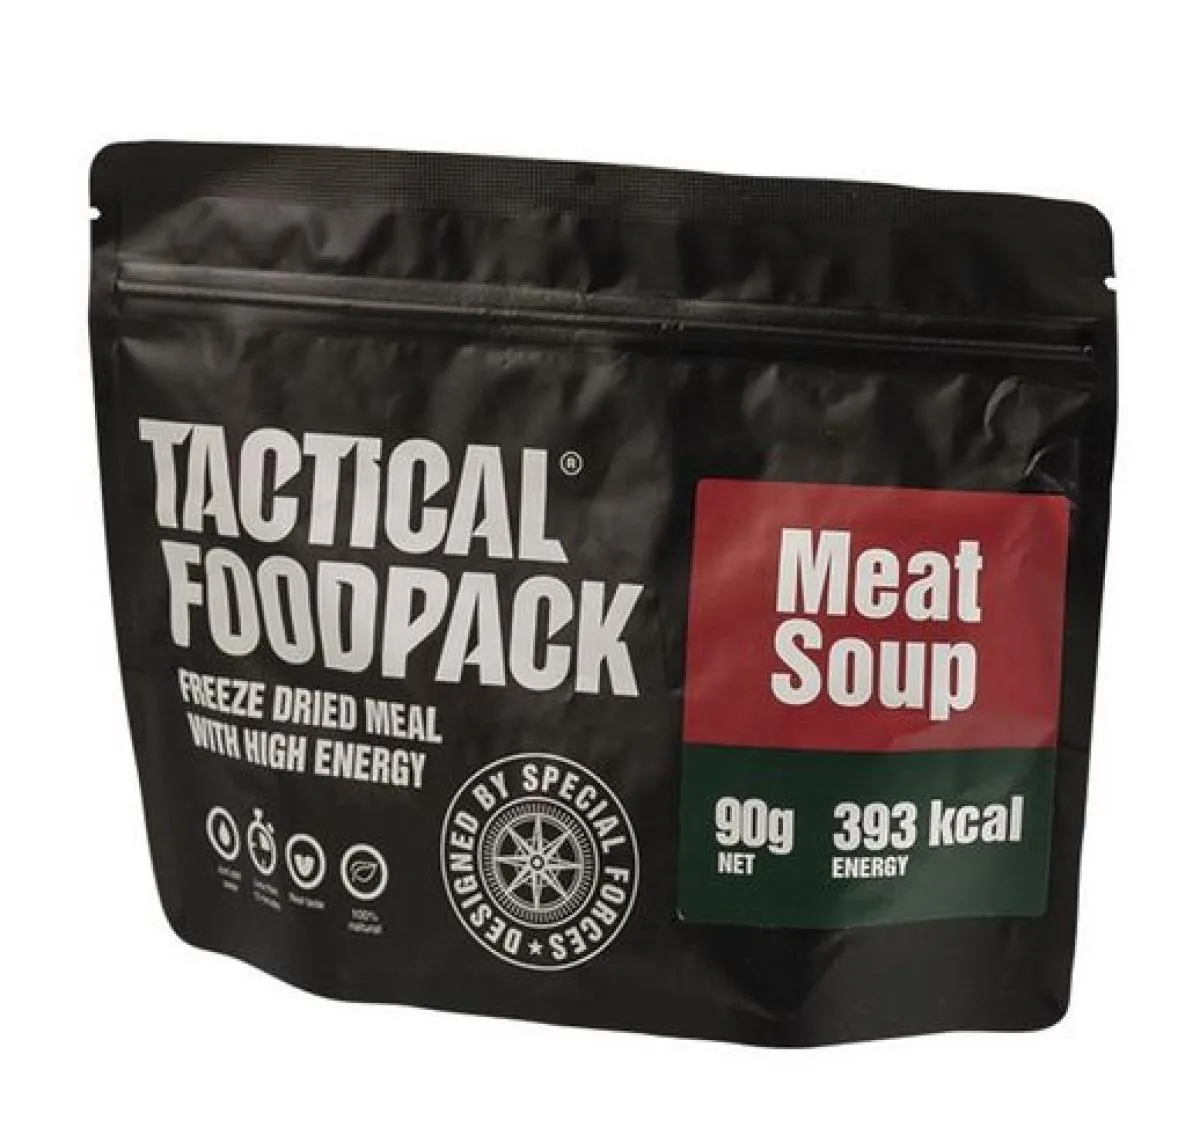 TACTICAL FOODPACK® MEAT SOUP